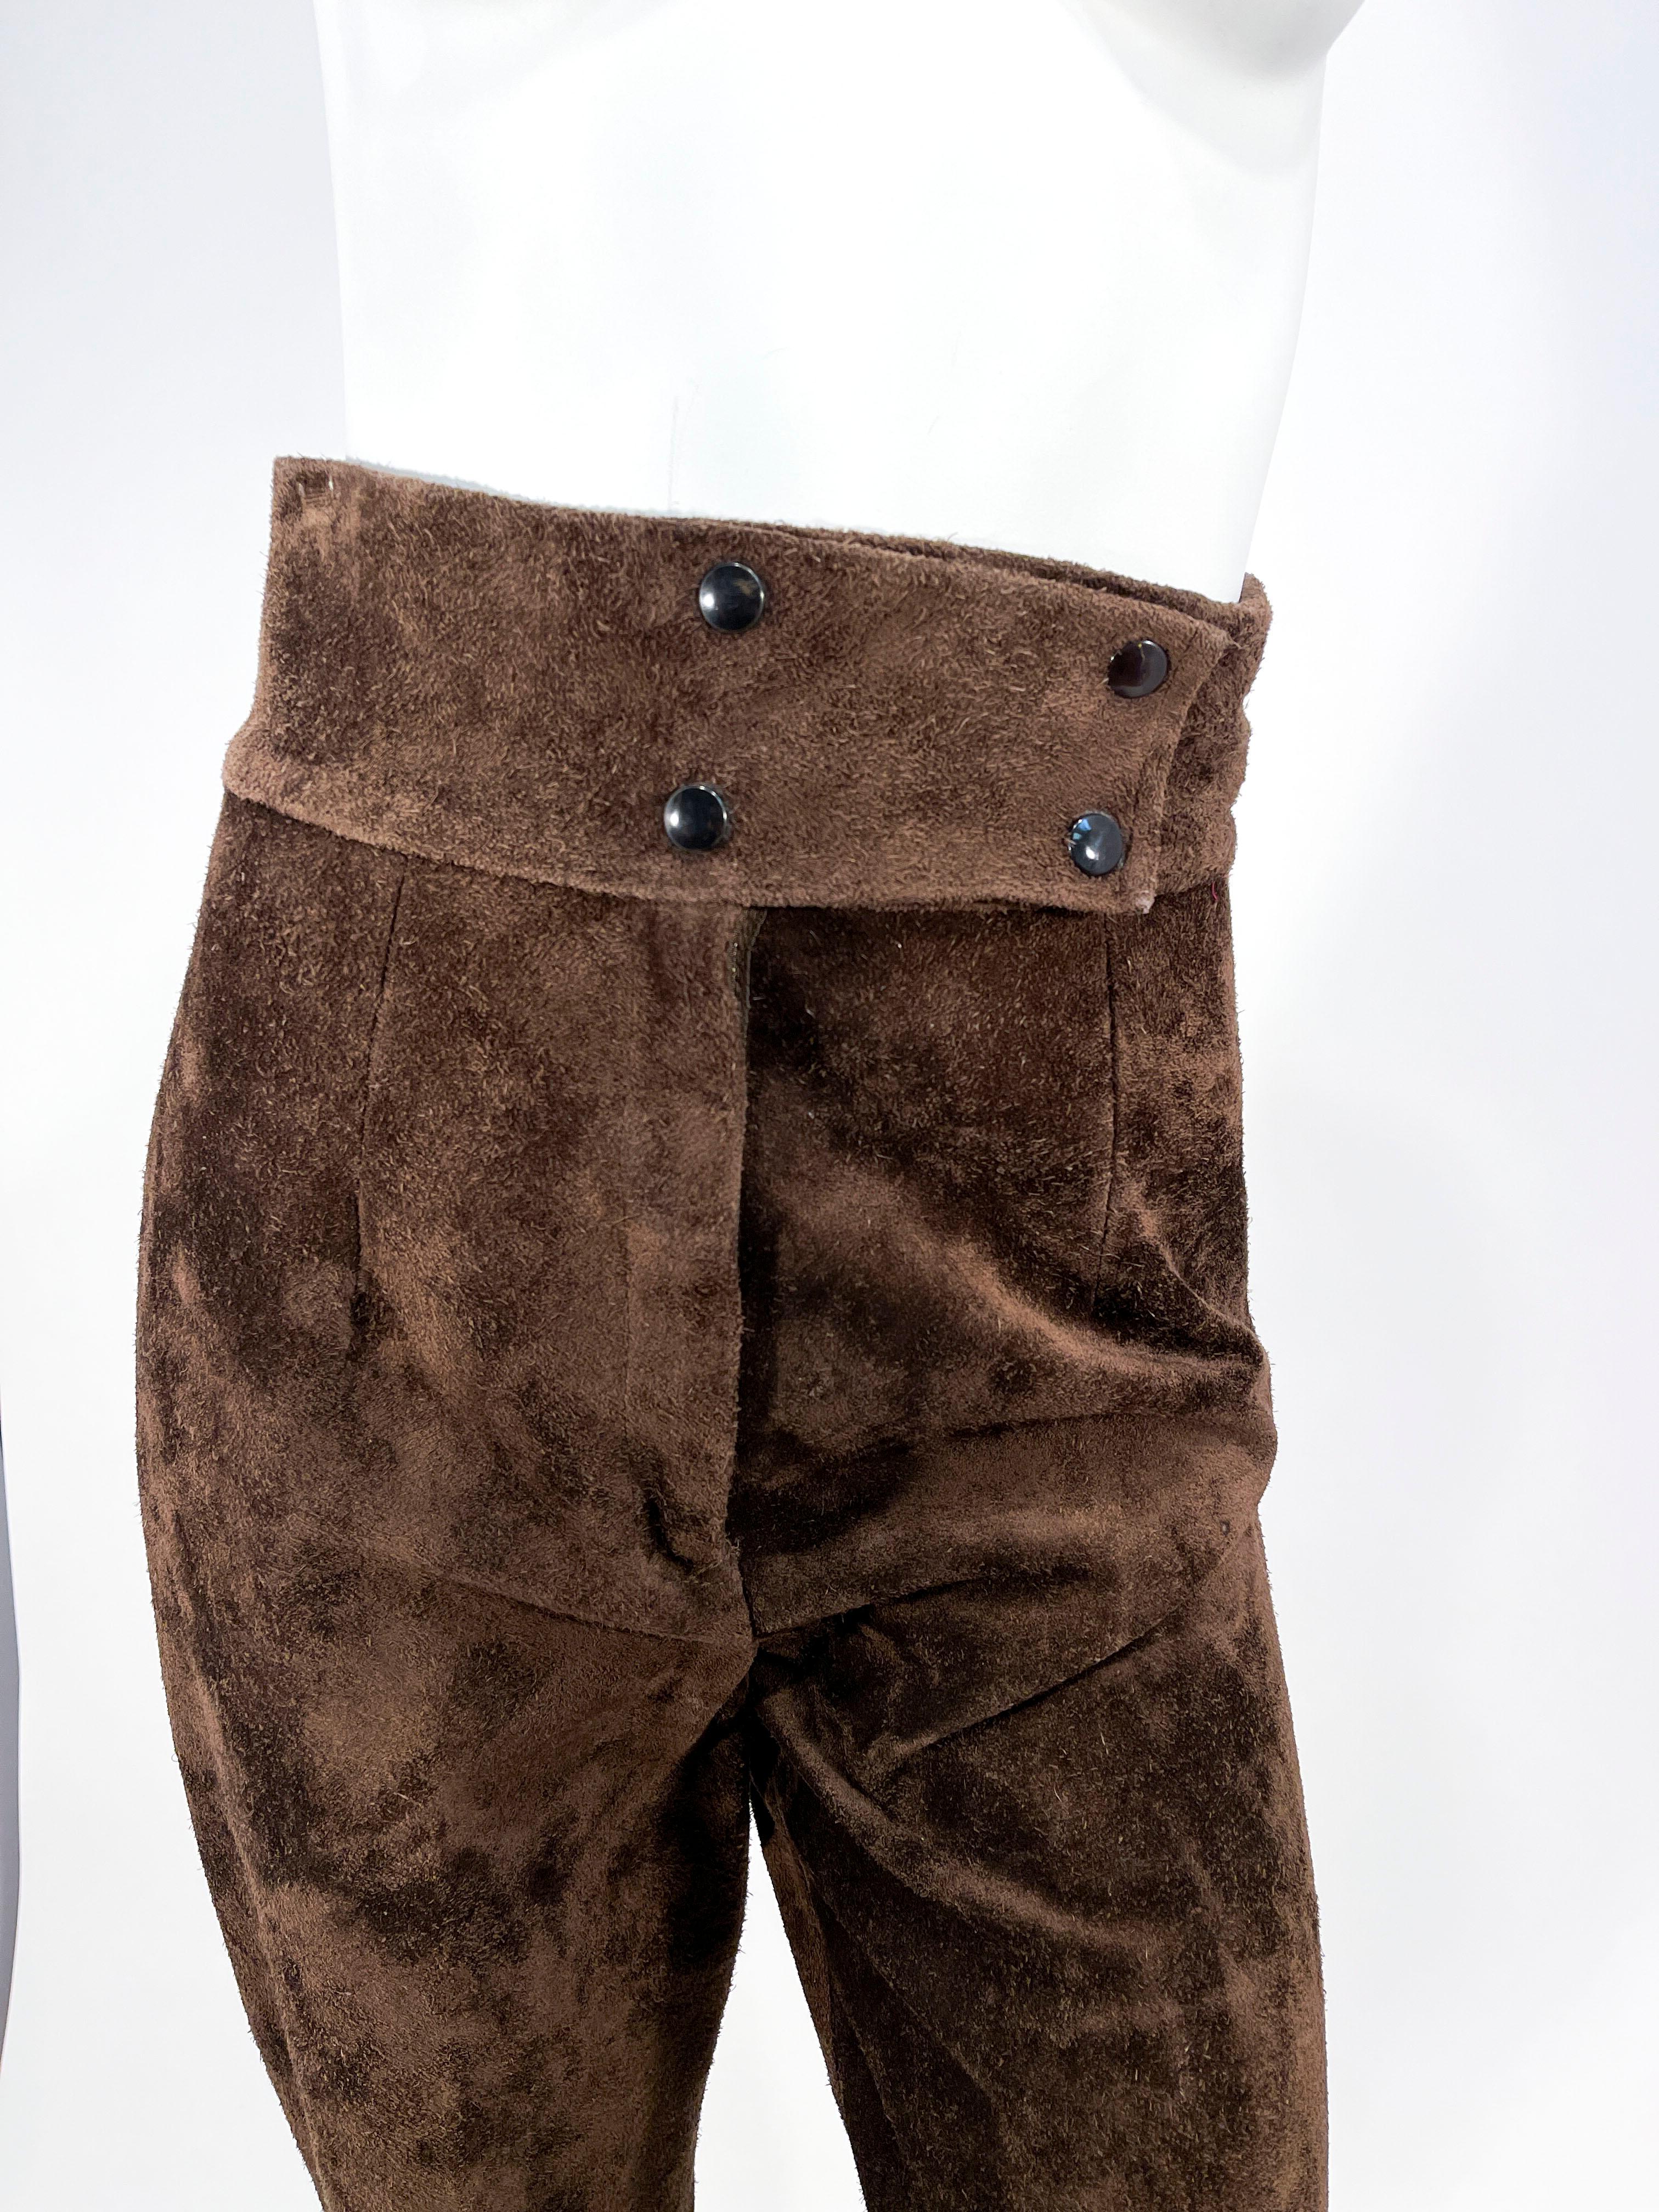 Late 1960s to early 1970s Saks Fifth Ave. chocolate brown brushed suede pants with a wide high wide waistband and a double snap closure. The legs have permanently stitched pleats and have a slight flair. These are unlined with a zipper fly.